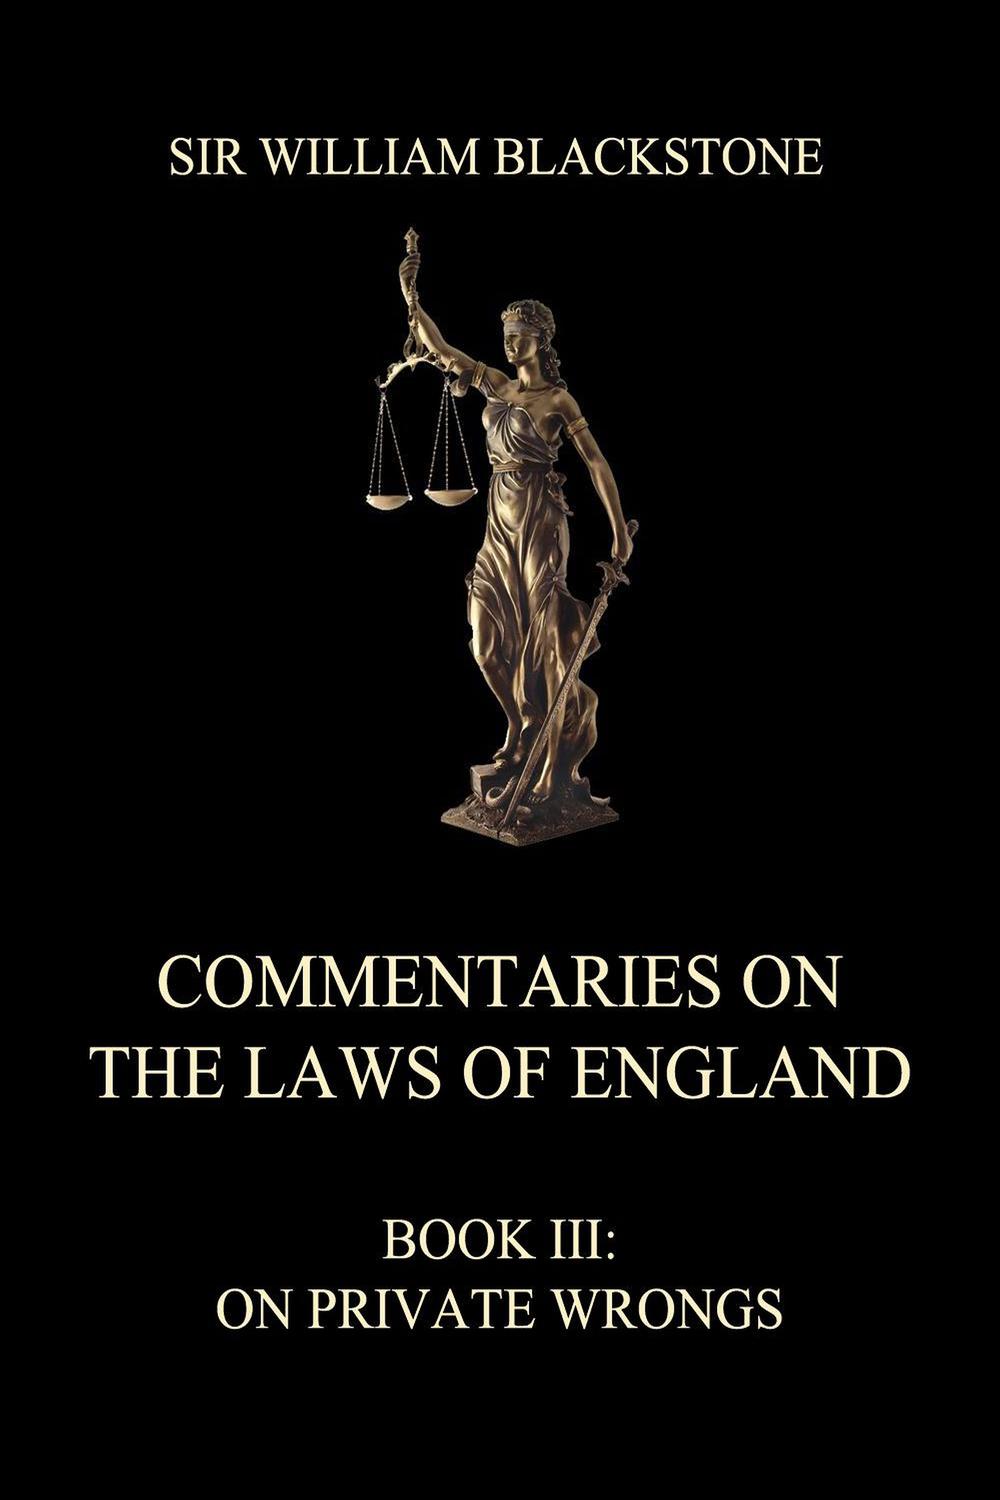 Commentaries on the Laws of England - Sir William Blackstone